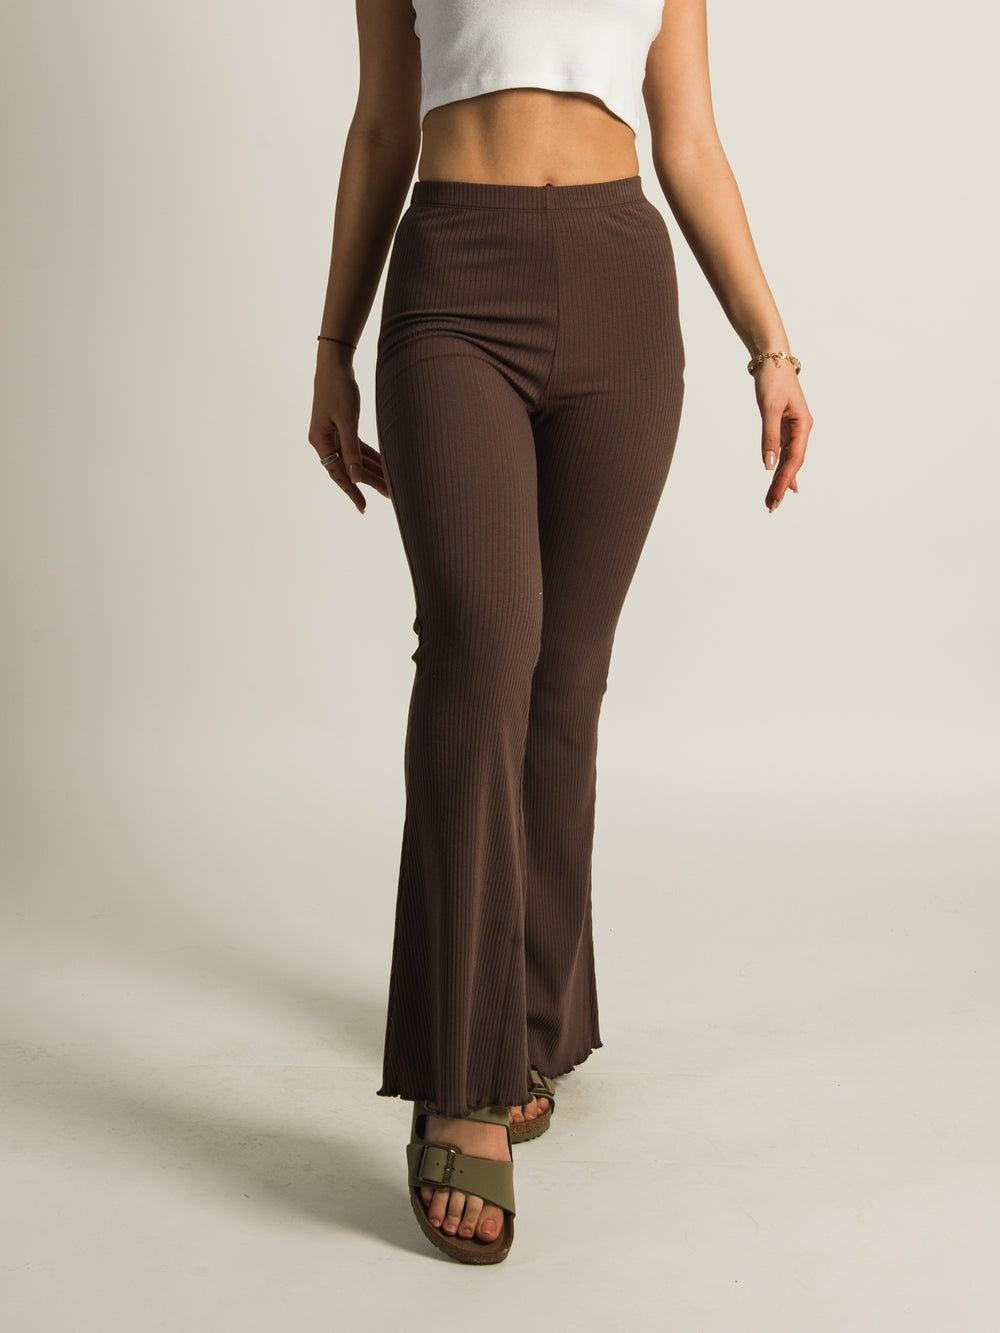 HARLOW MARIE LOUNGE FLARE PANT - HEATHER CHARCOAL